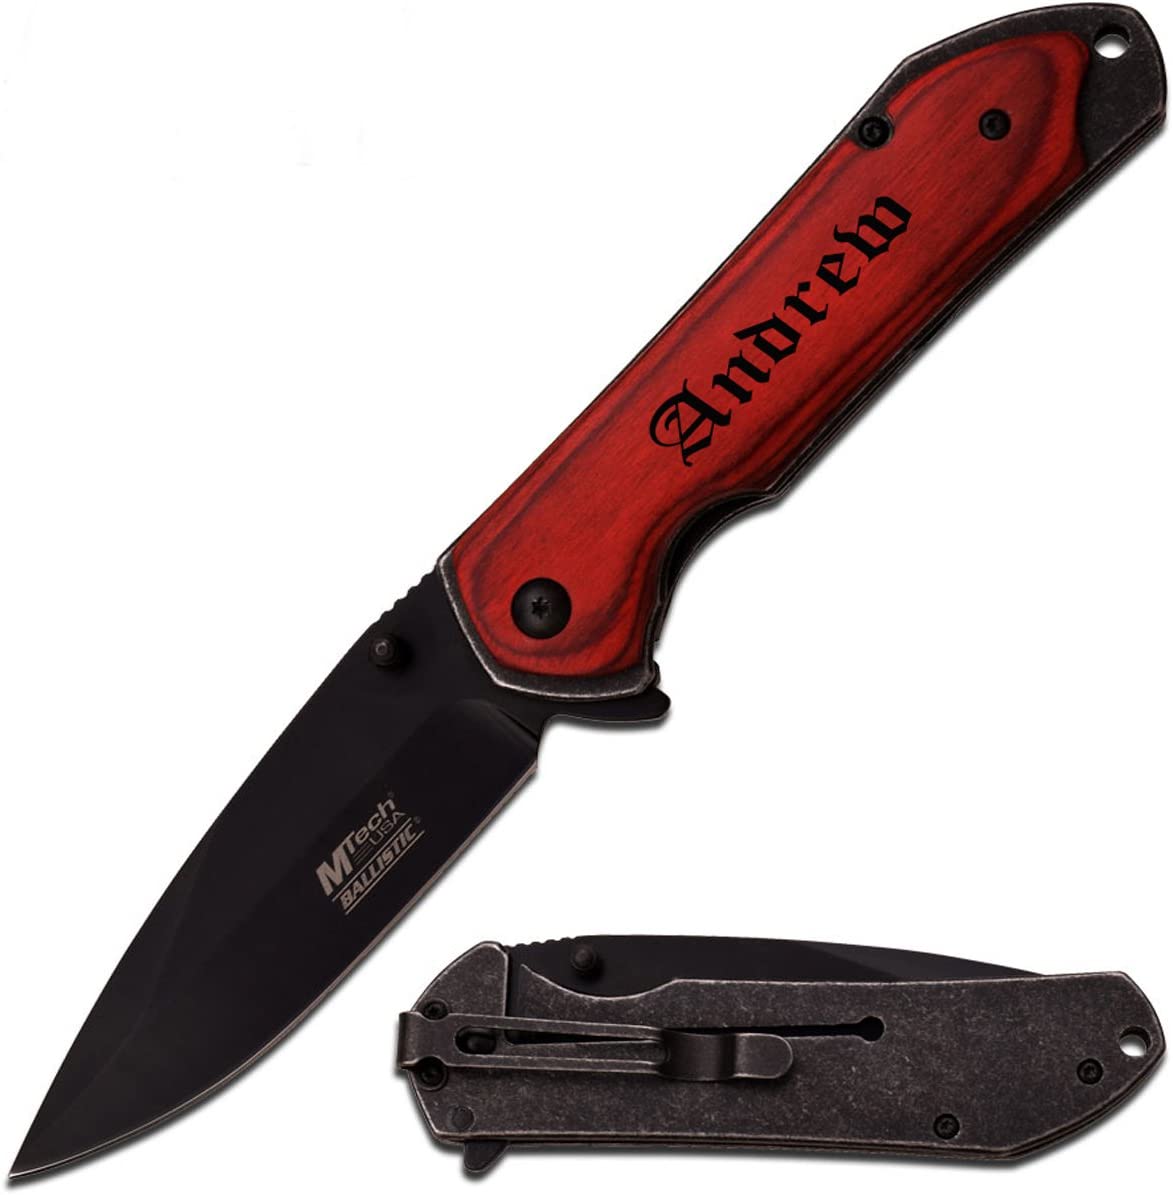 MTECH USA – Personalized Knife Pocket Knife with Free Engraving - Red Wood, Pack 1